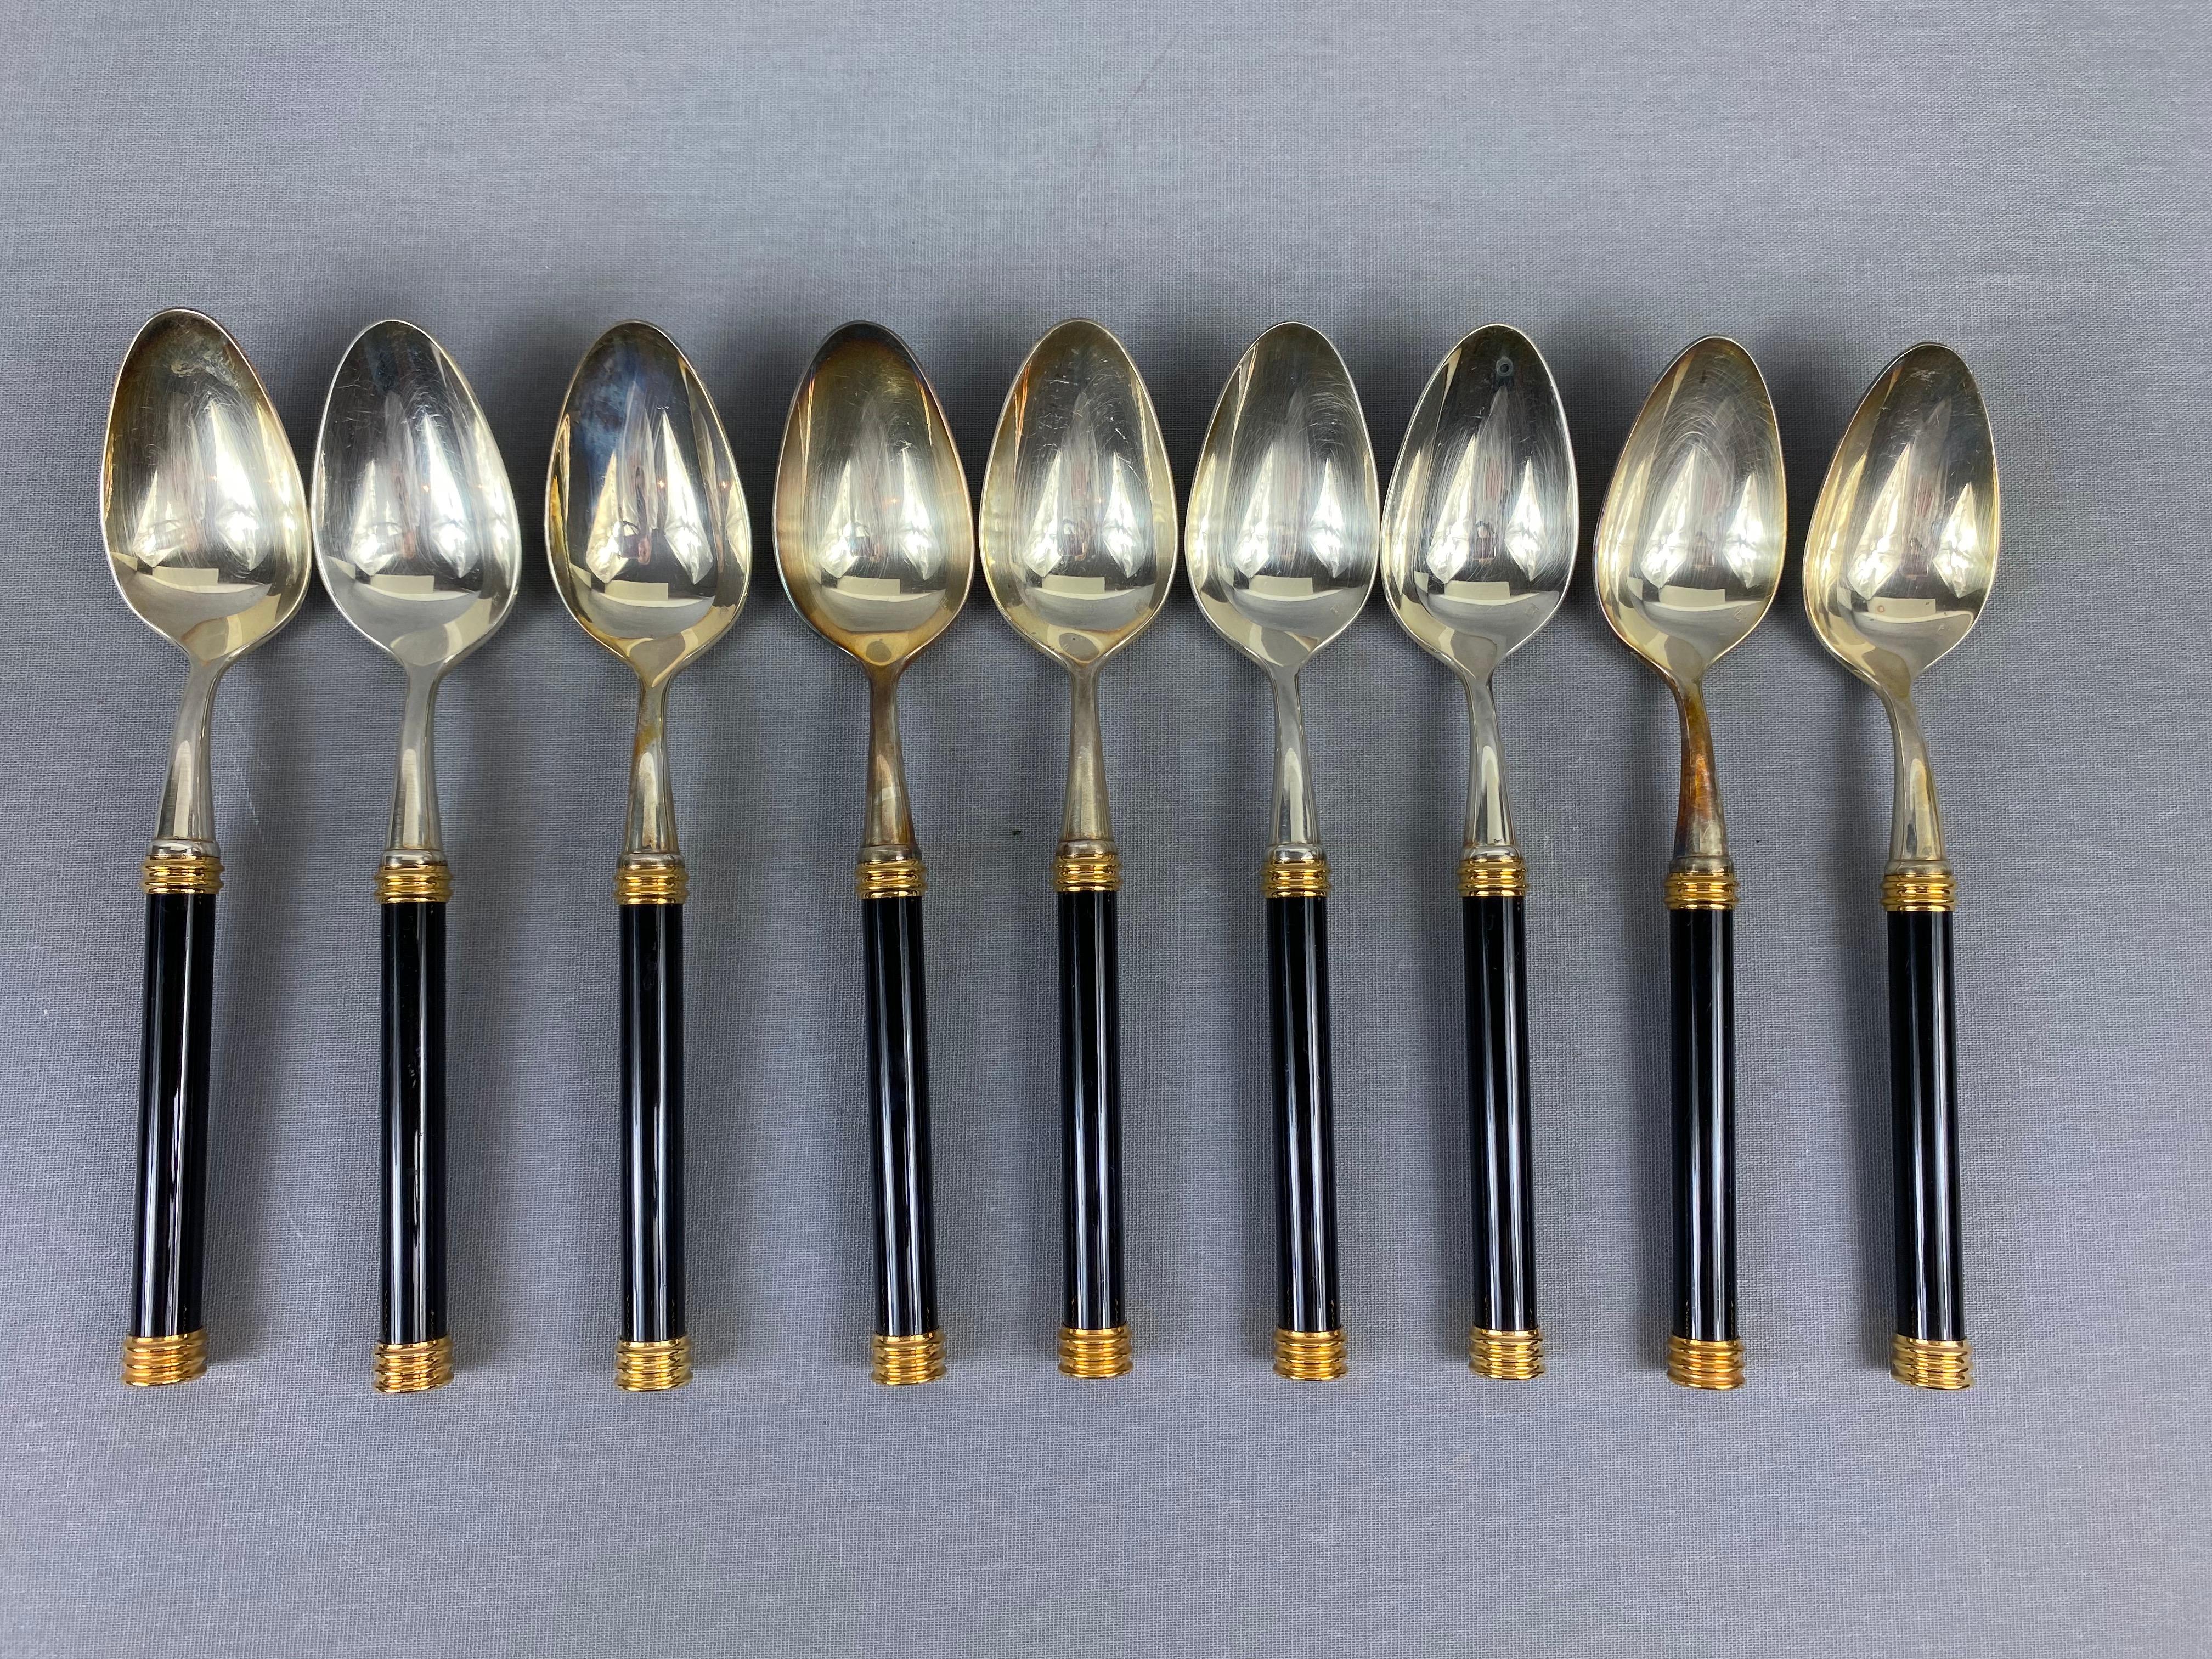 Large Vuillermet France cutlery set in black gold with knife rests

Beautiful rare large 45-piece silver cutlery set from Vuillermet, France, circa 1950s-1960s. The handle is probably framed in bakelite and beautifully gilded. The set consists of